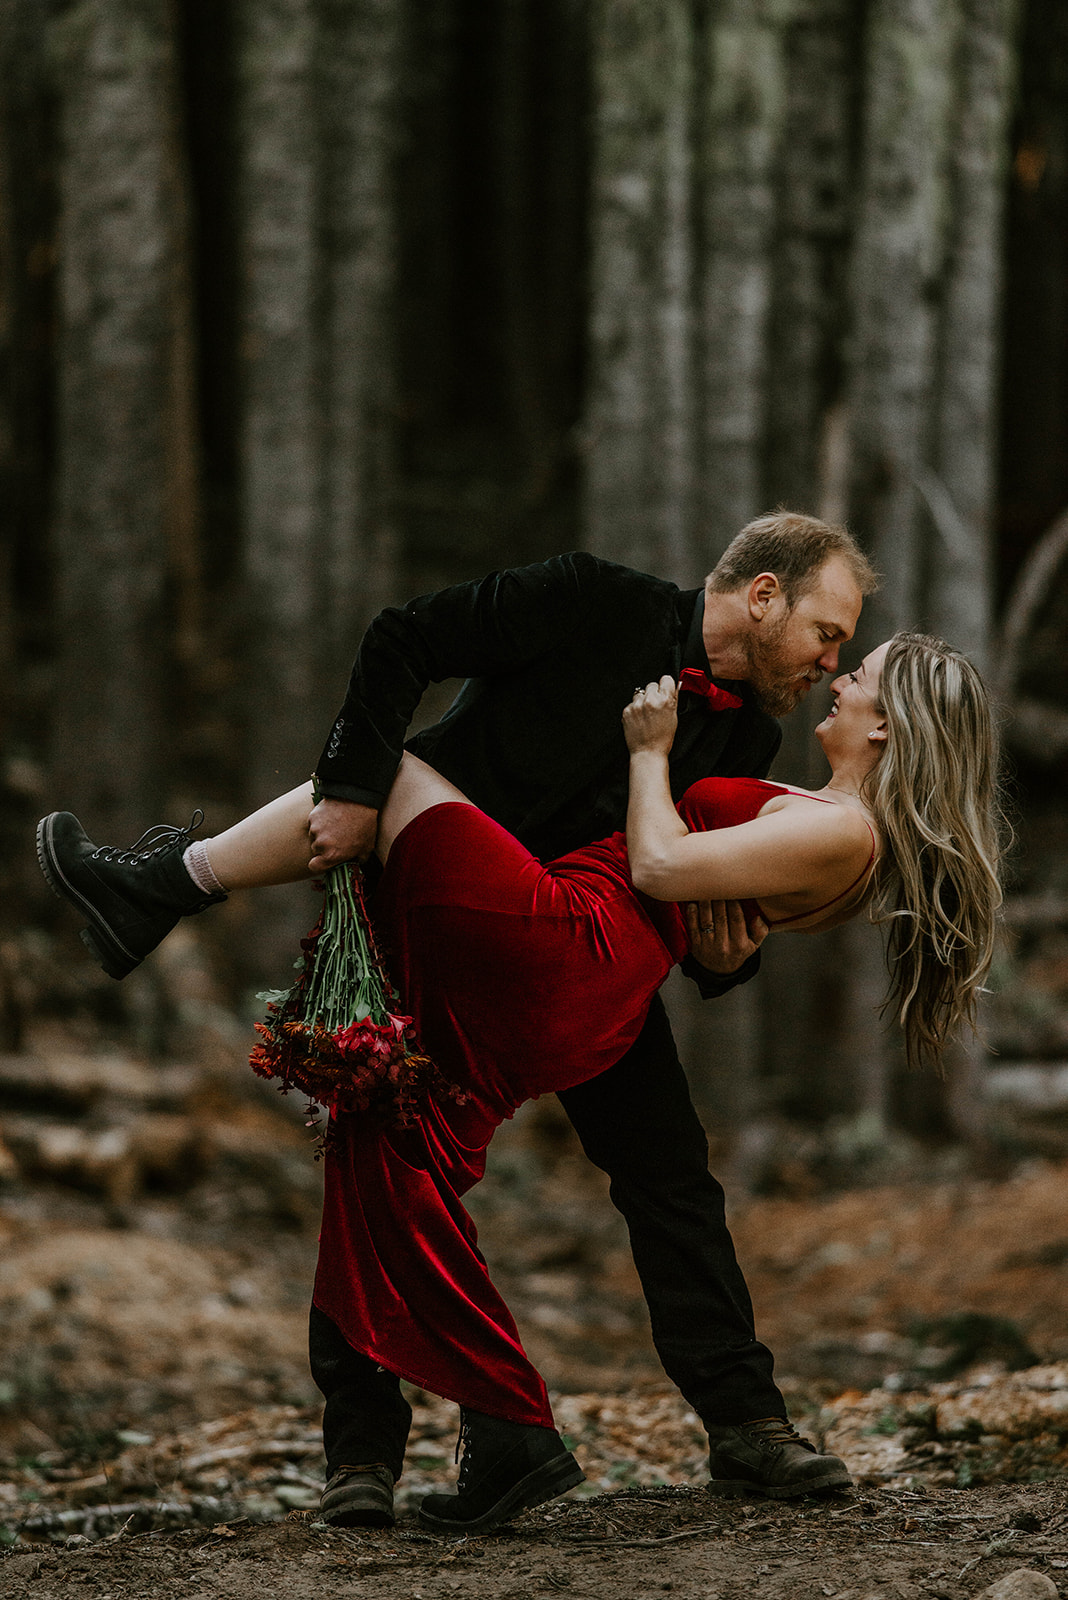 A man dipping his wife in the forest while she wears a red velvet dress for engagement photos